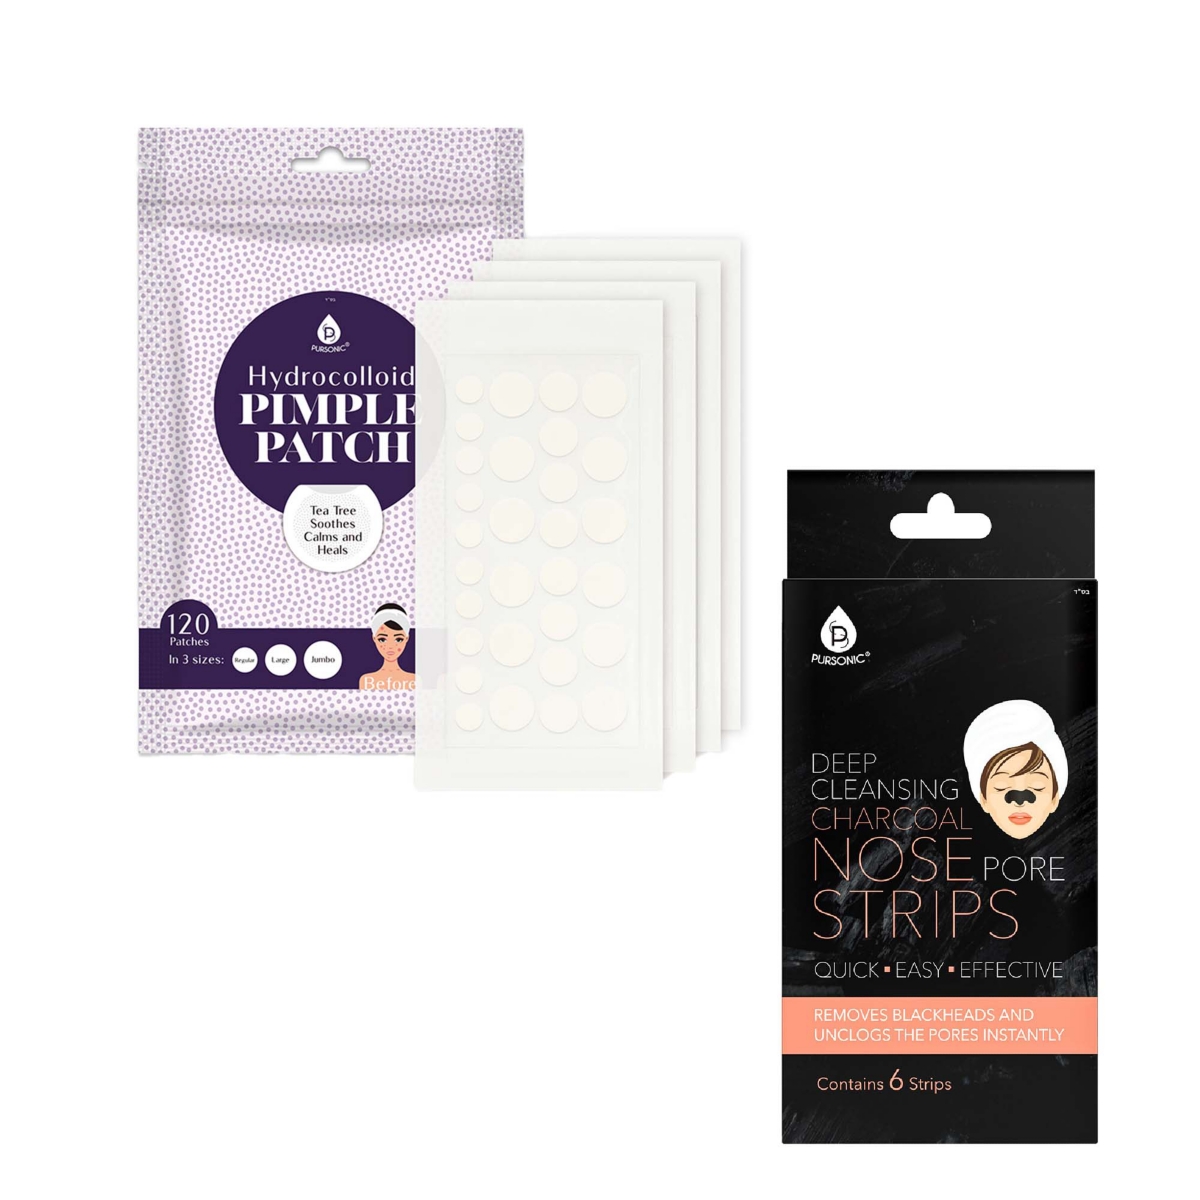 Deep Cleansing Charcoal Nose Pore Strip 6-Pack & Hydrocolloid Pimple Patch, 120-Count